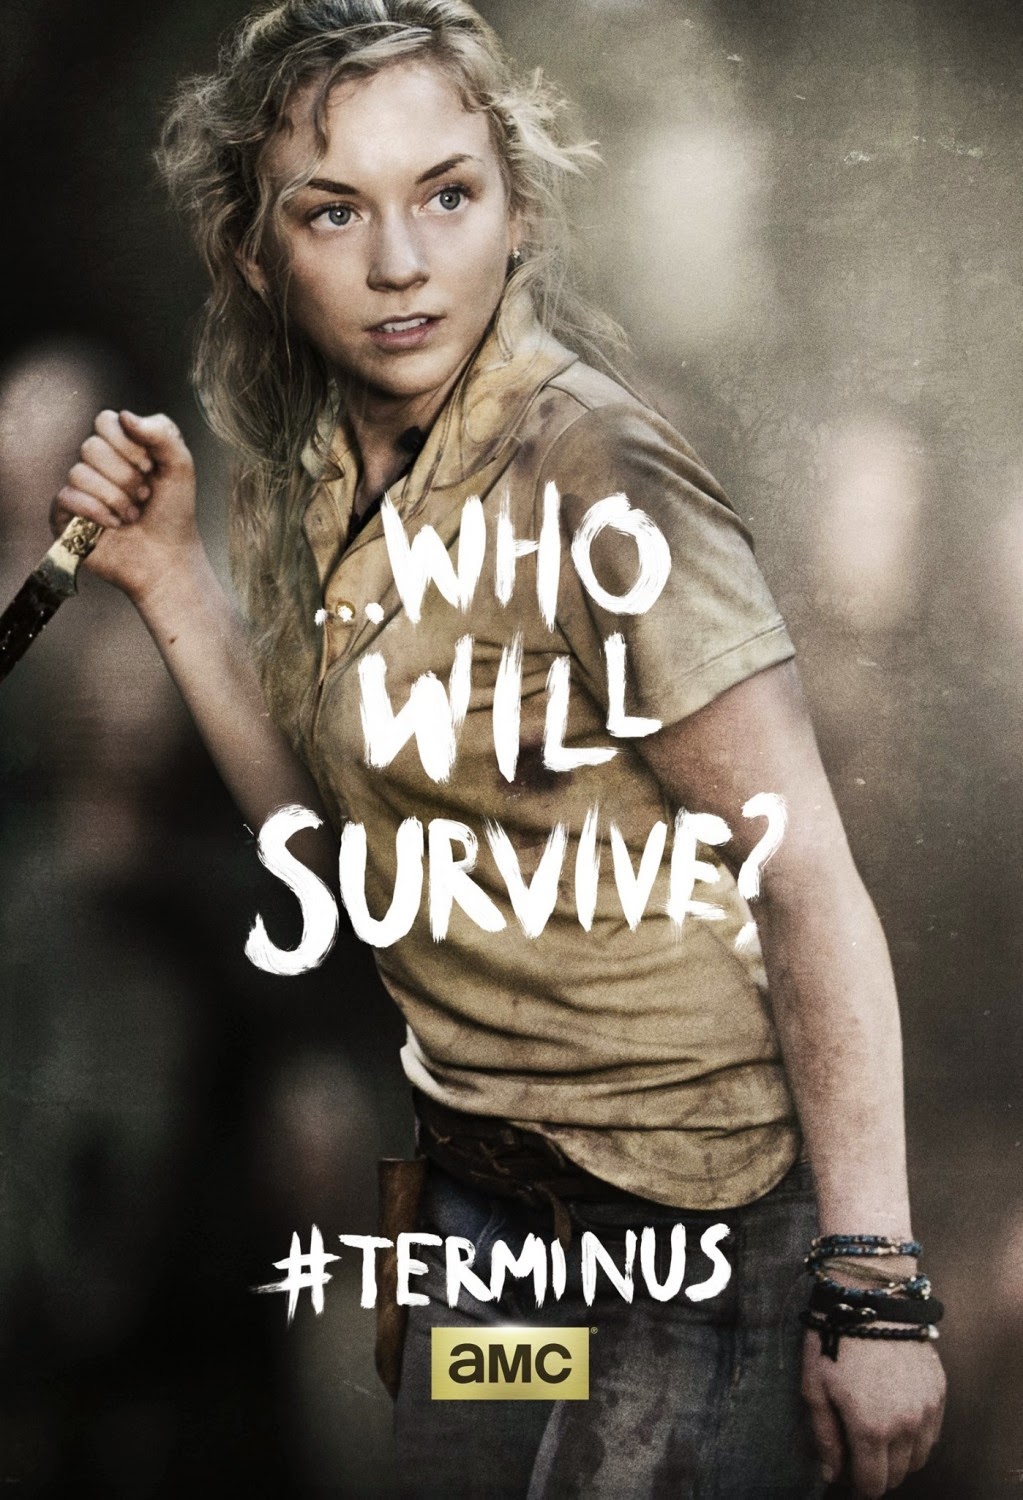 The Walking Dead Season 4 Finale “Terminus” One Sheet Television Posters - ...Who Will Survive? - Emily Kinney as Beth Greene